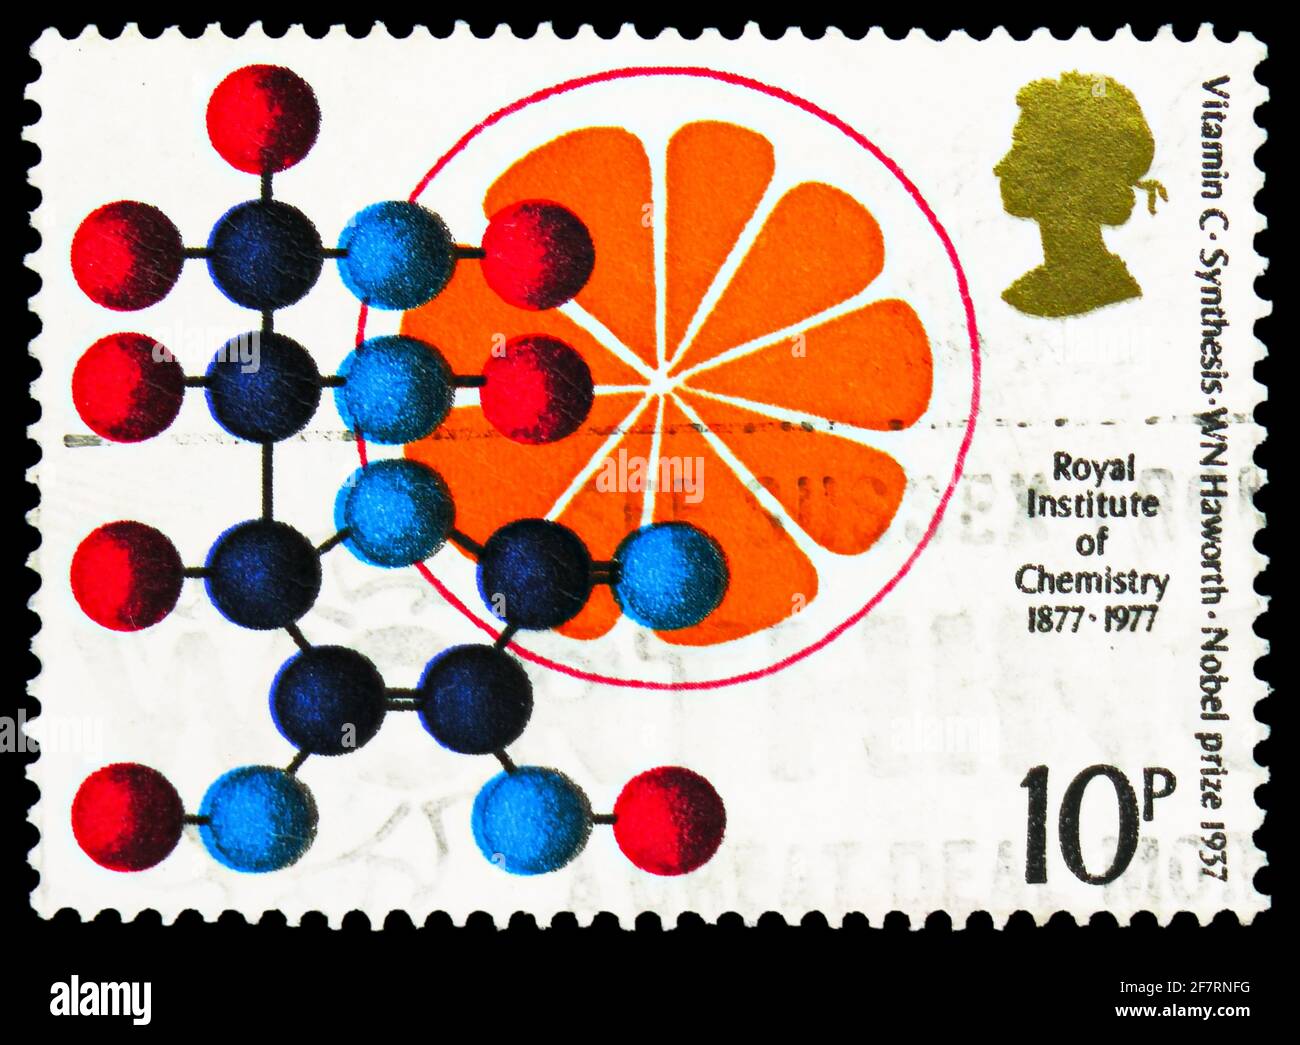 MOSCOW, RUSSIA - JANUARY 17, 2021: Postage stamp printed in United Kingdom shows Vitamin C - Synthesis, Royal Institute of Chemistry Centenary serie, Stock Photo